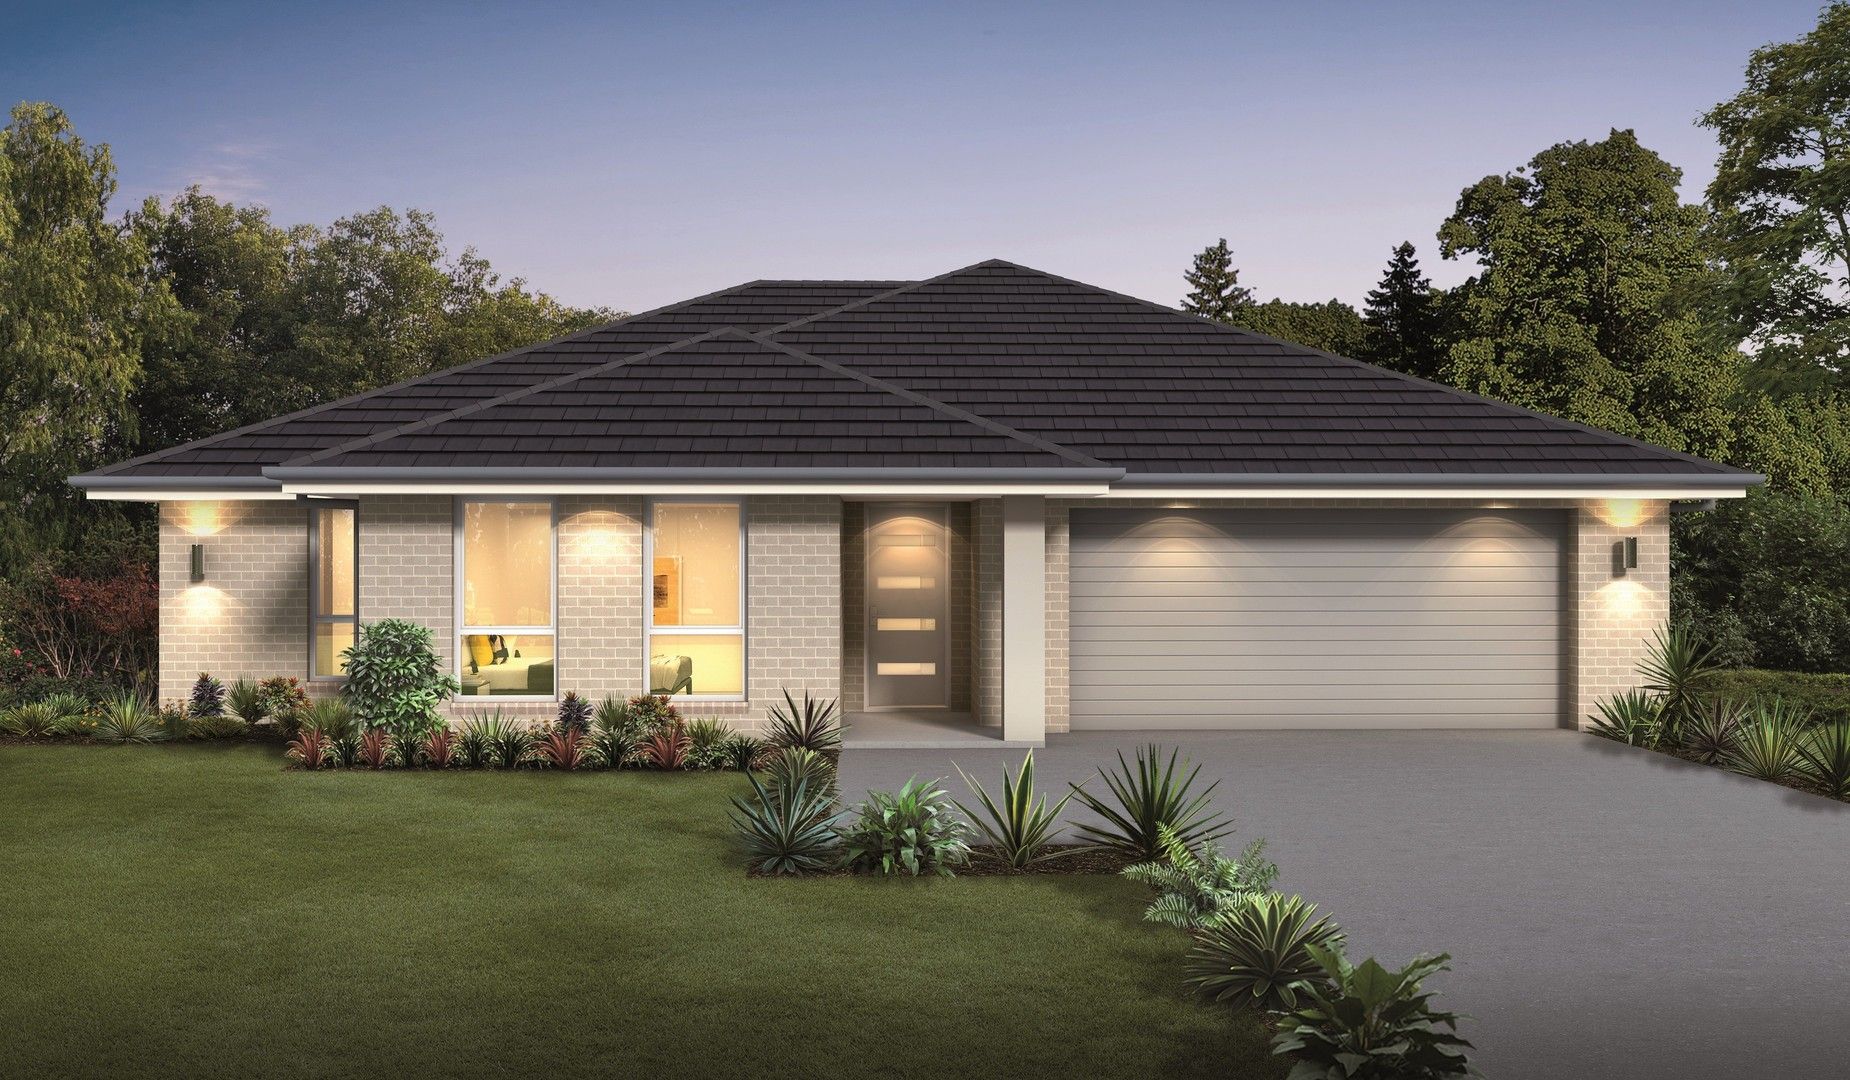 4 bedrooms New House & Land in Lot 28 Rinnana Place ST GEORGES BASIN NSW, 2540